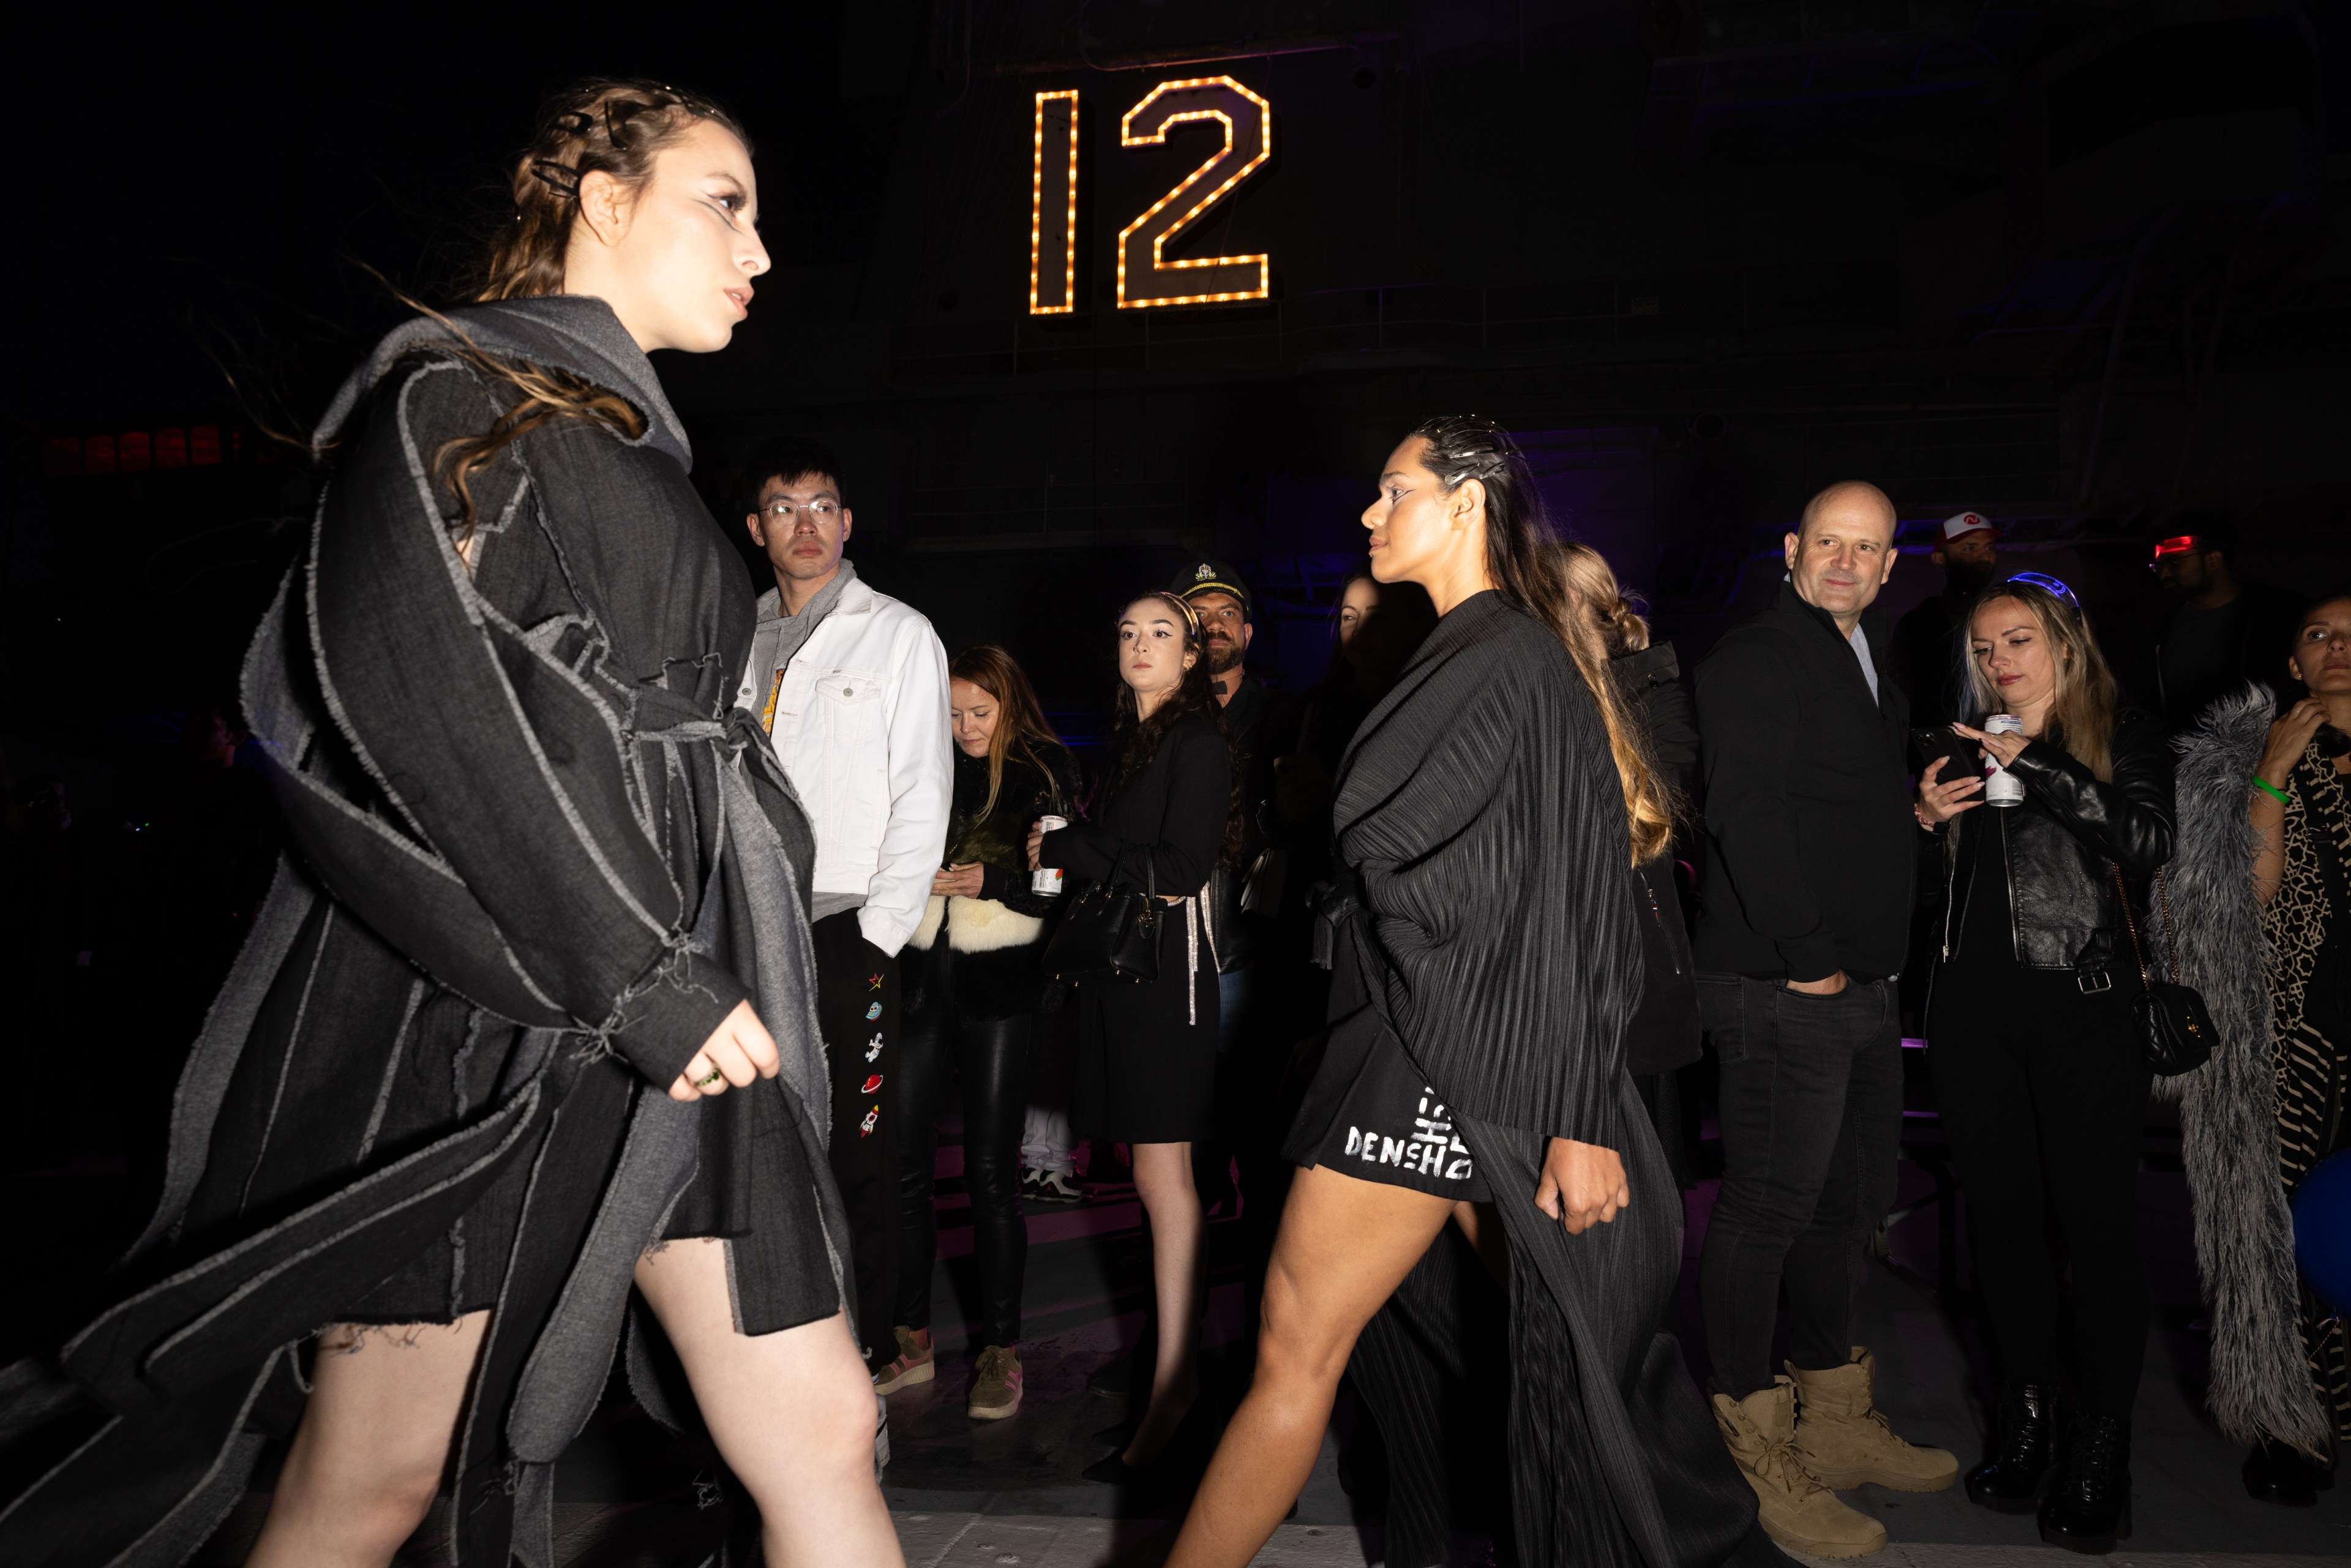 Two models in black outfits walk a runway while an audience watches. The background is dark with a &quot;12&quot; light display above. Some people are engaged and others look at their phones.